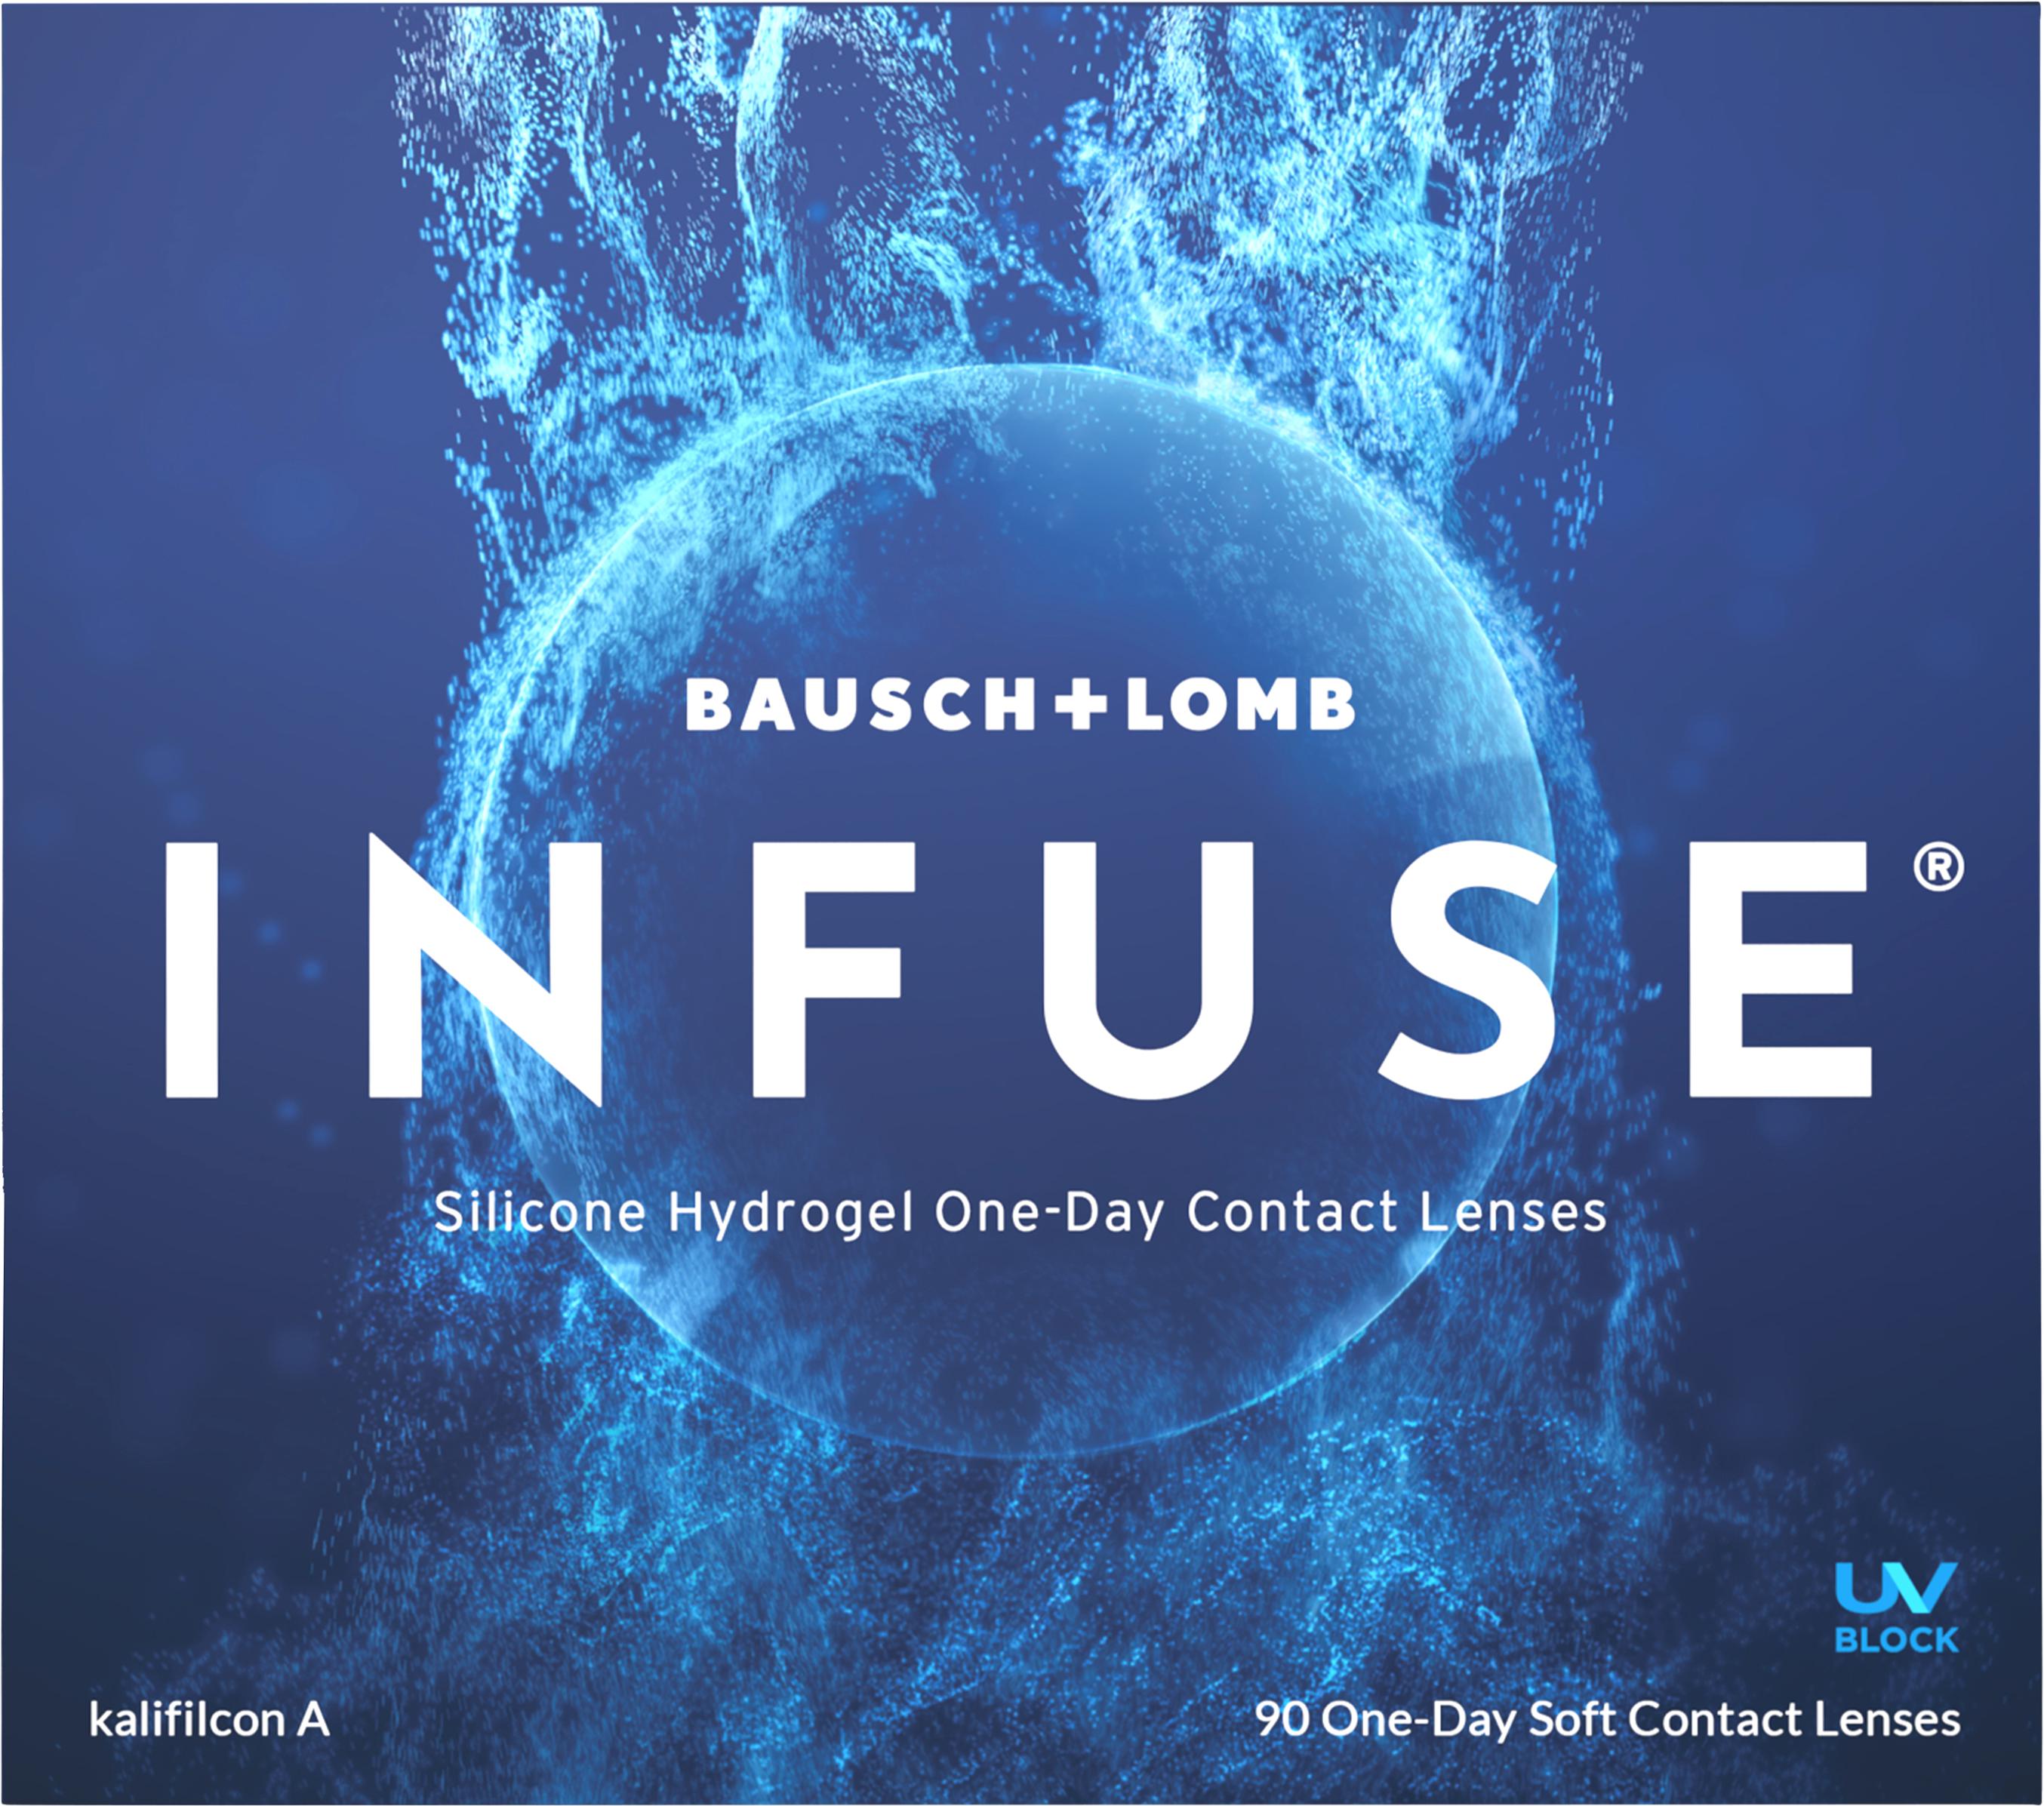 Bausch + Lomb INFUSE™